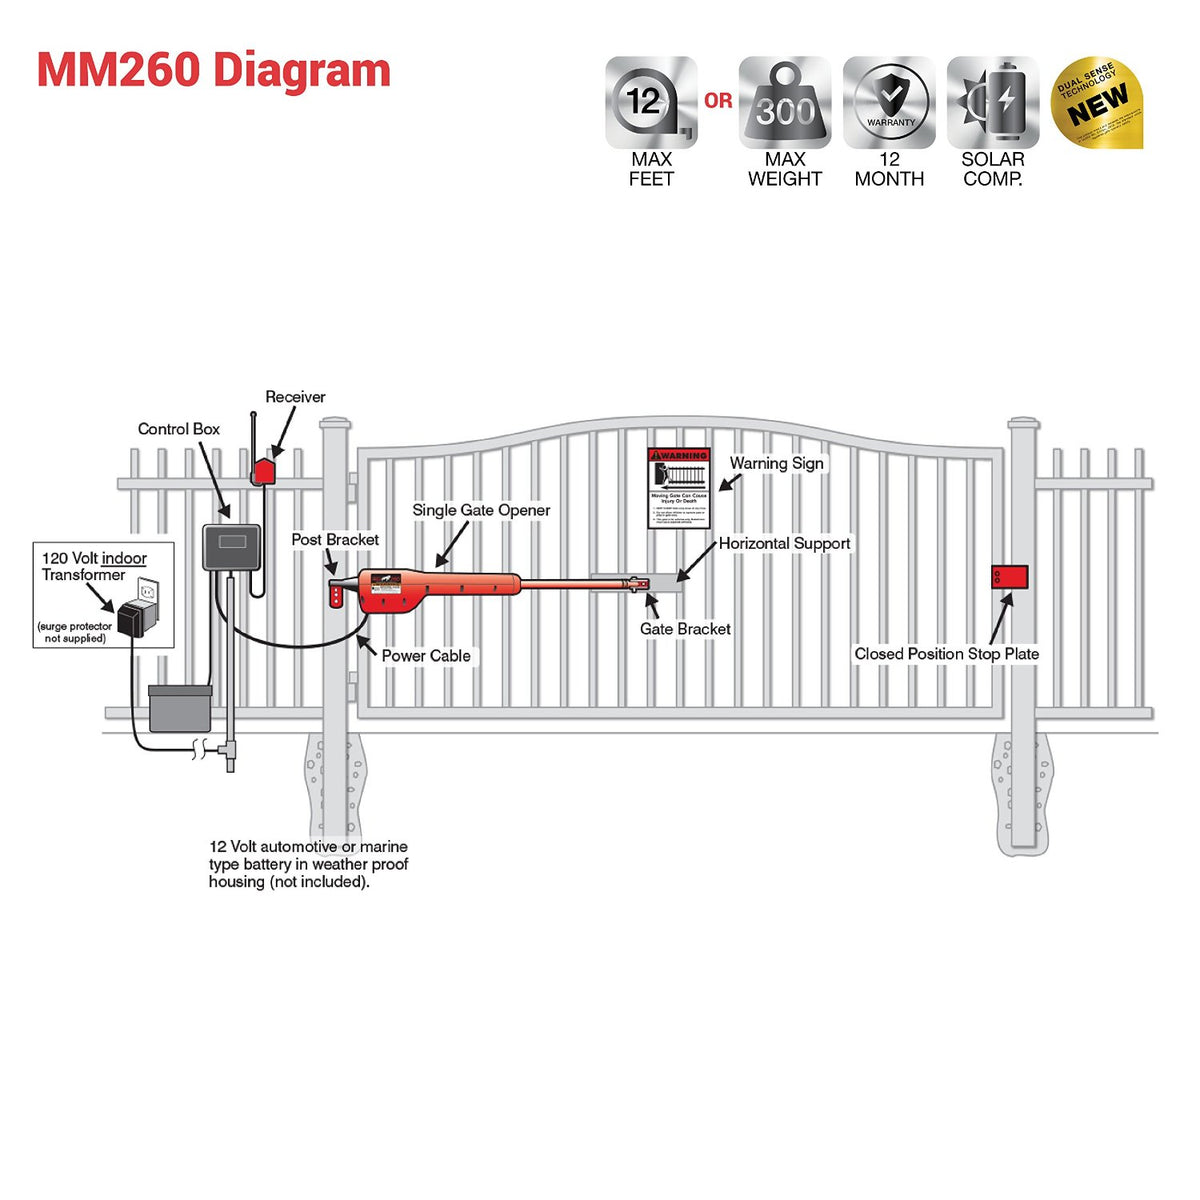 Buy mighty mule mm260 - Online store for landscape supplies & farm fencing, gate openers & keypads in USA, on sale, low price, discount deals, coupon code